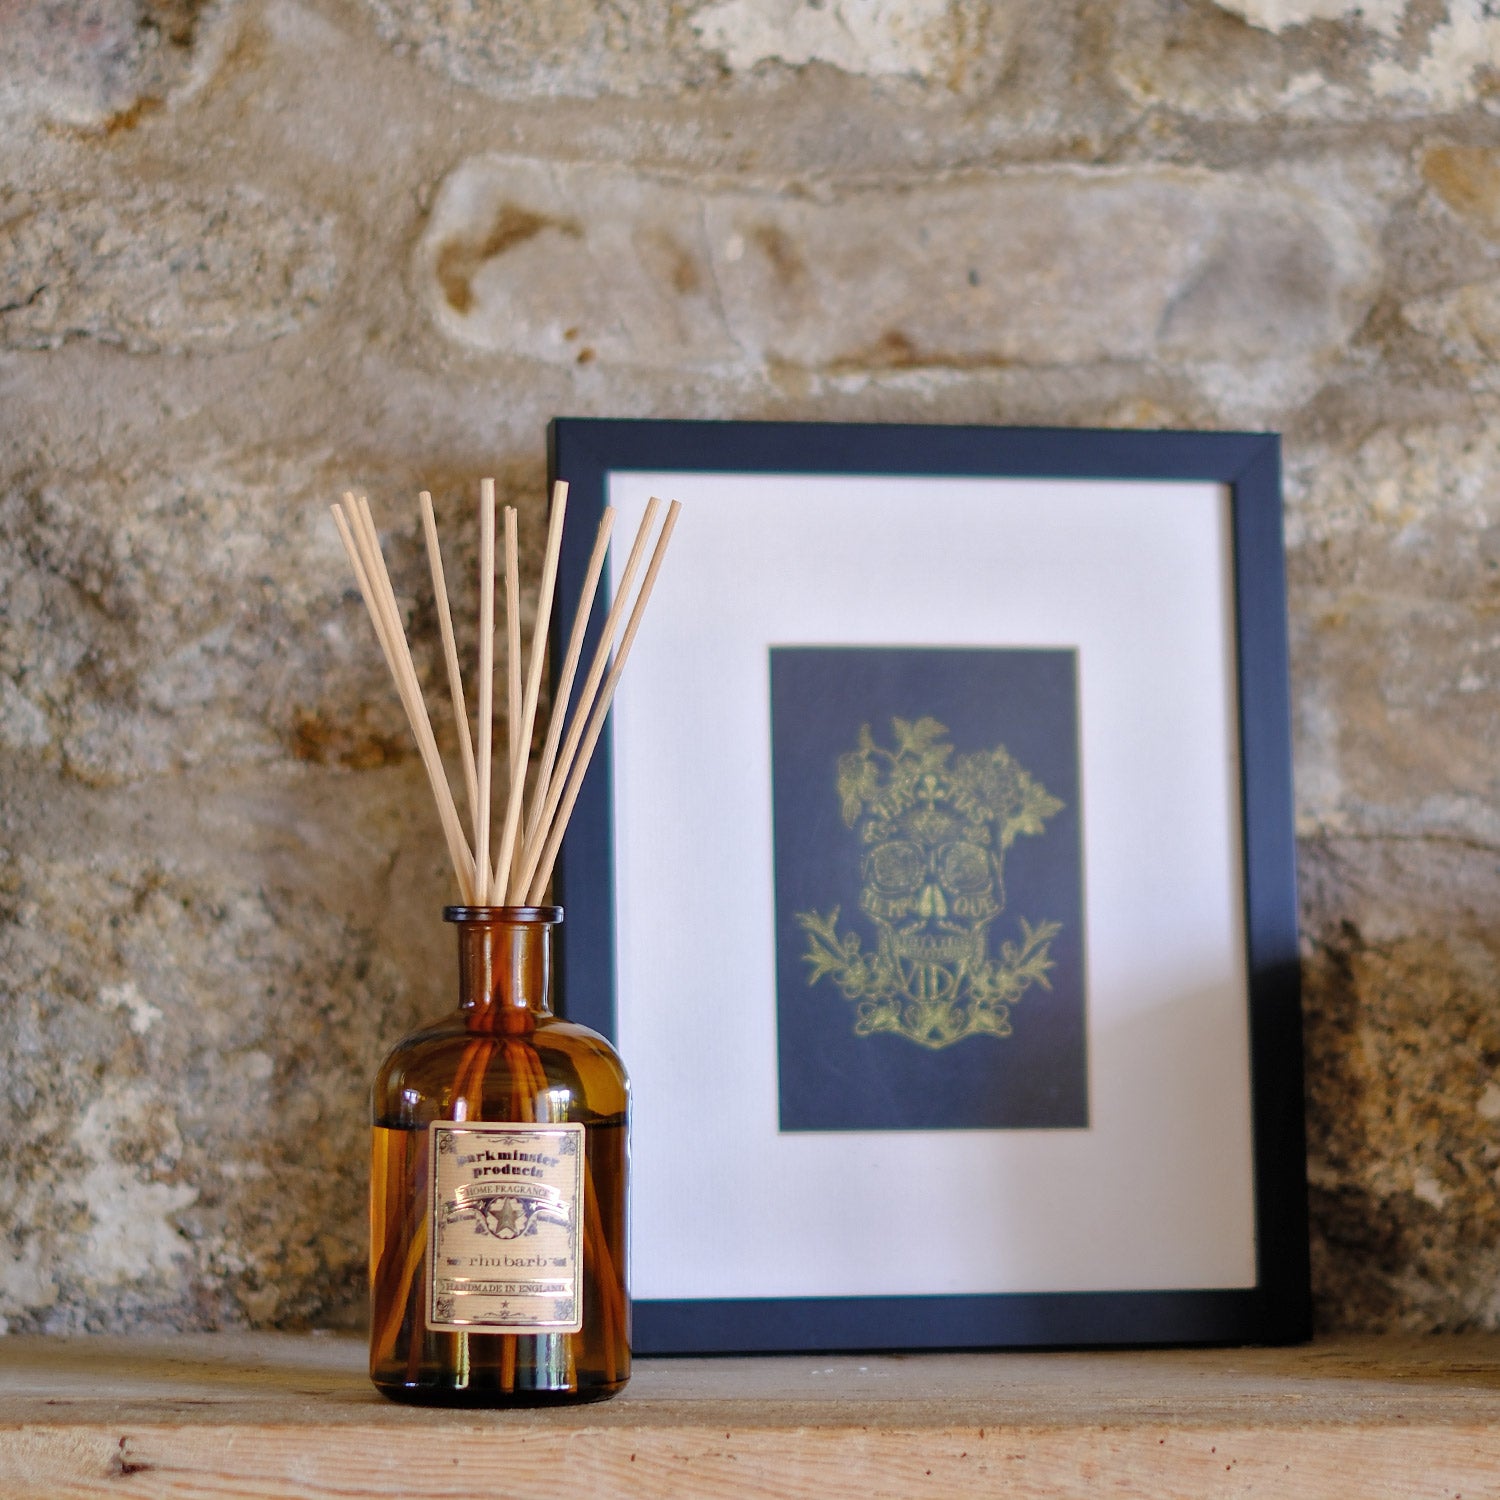 Immerse your home in the fresh and tangy scent of rhubarb with Parkminster's 200ml amber glass Apothecary Reed Diffuser. Handmade in our Cornish workshop, this diffuser features contemporary glassware and 100% plant-based ingredients for an eco-friendly and stylish fragrance solution